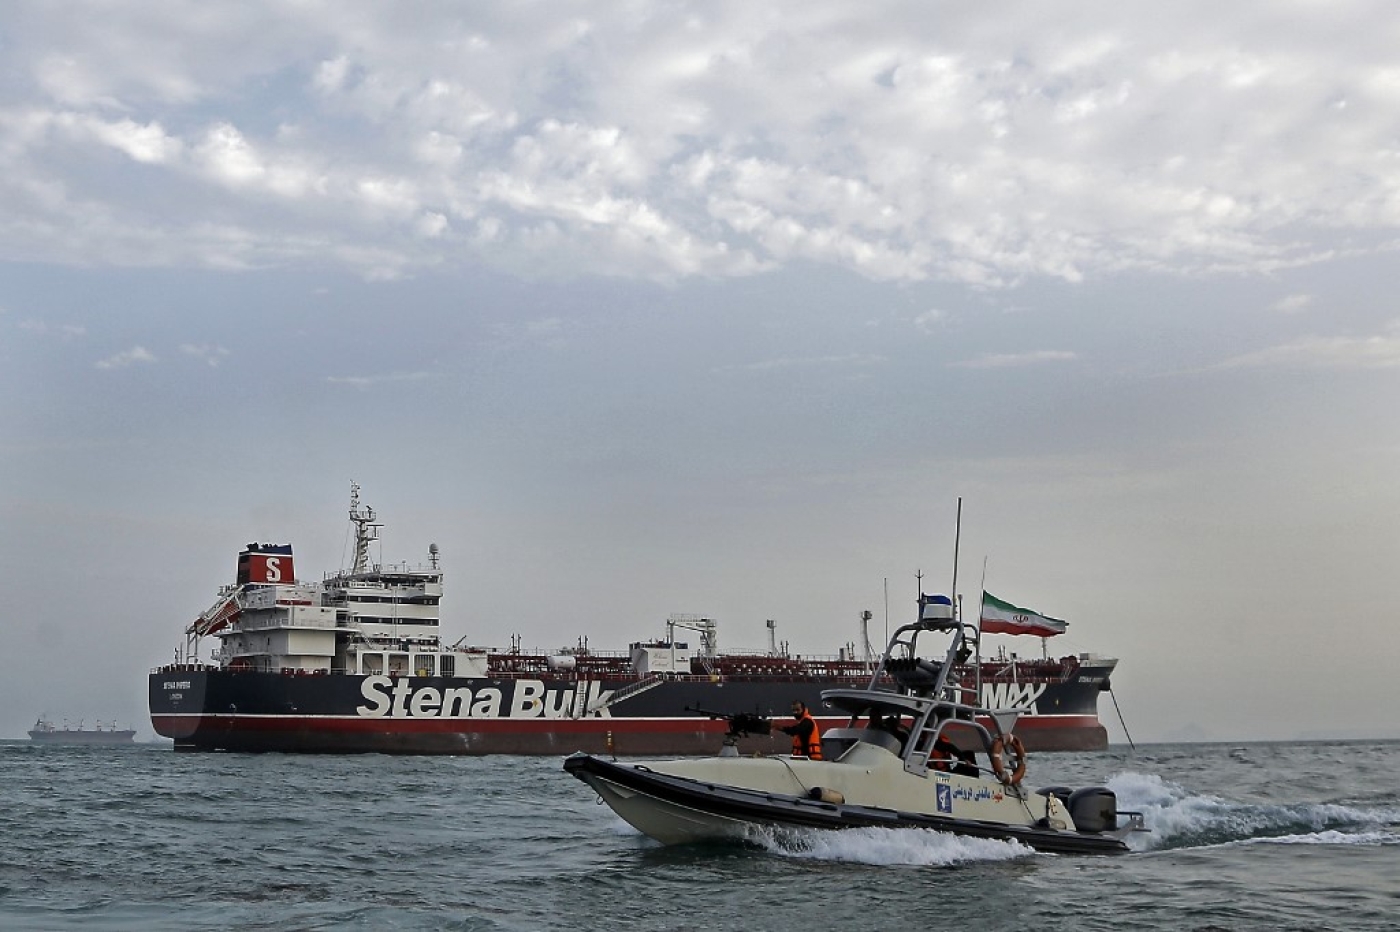 US waged cyberattack on database used by Iran to target tankers